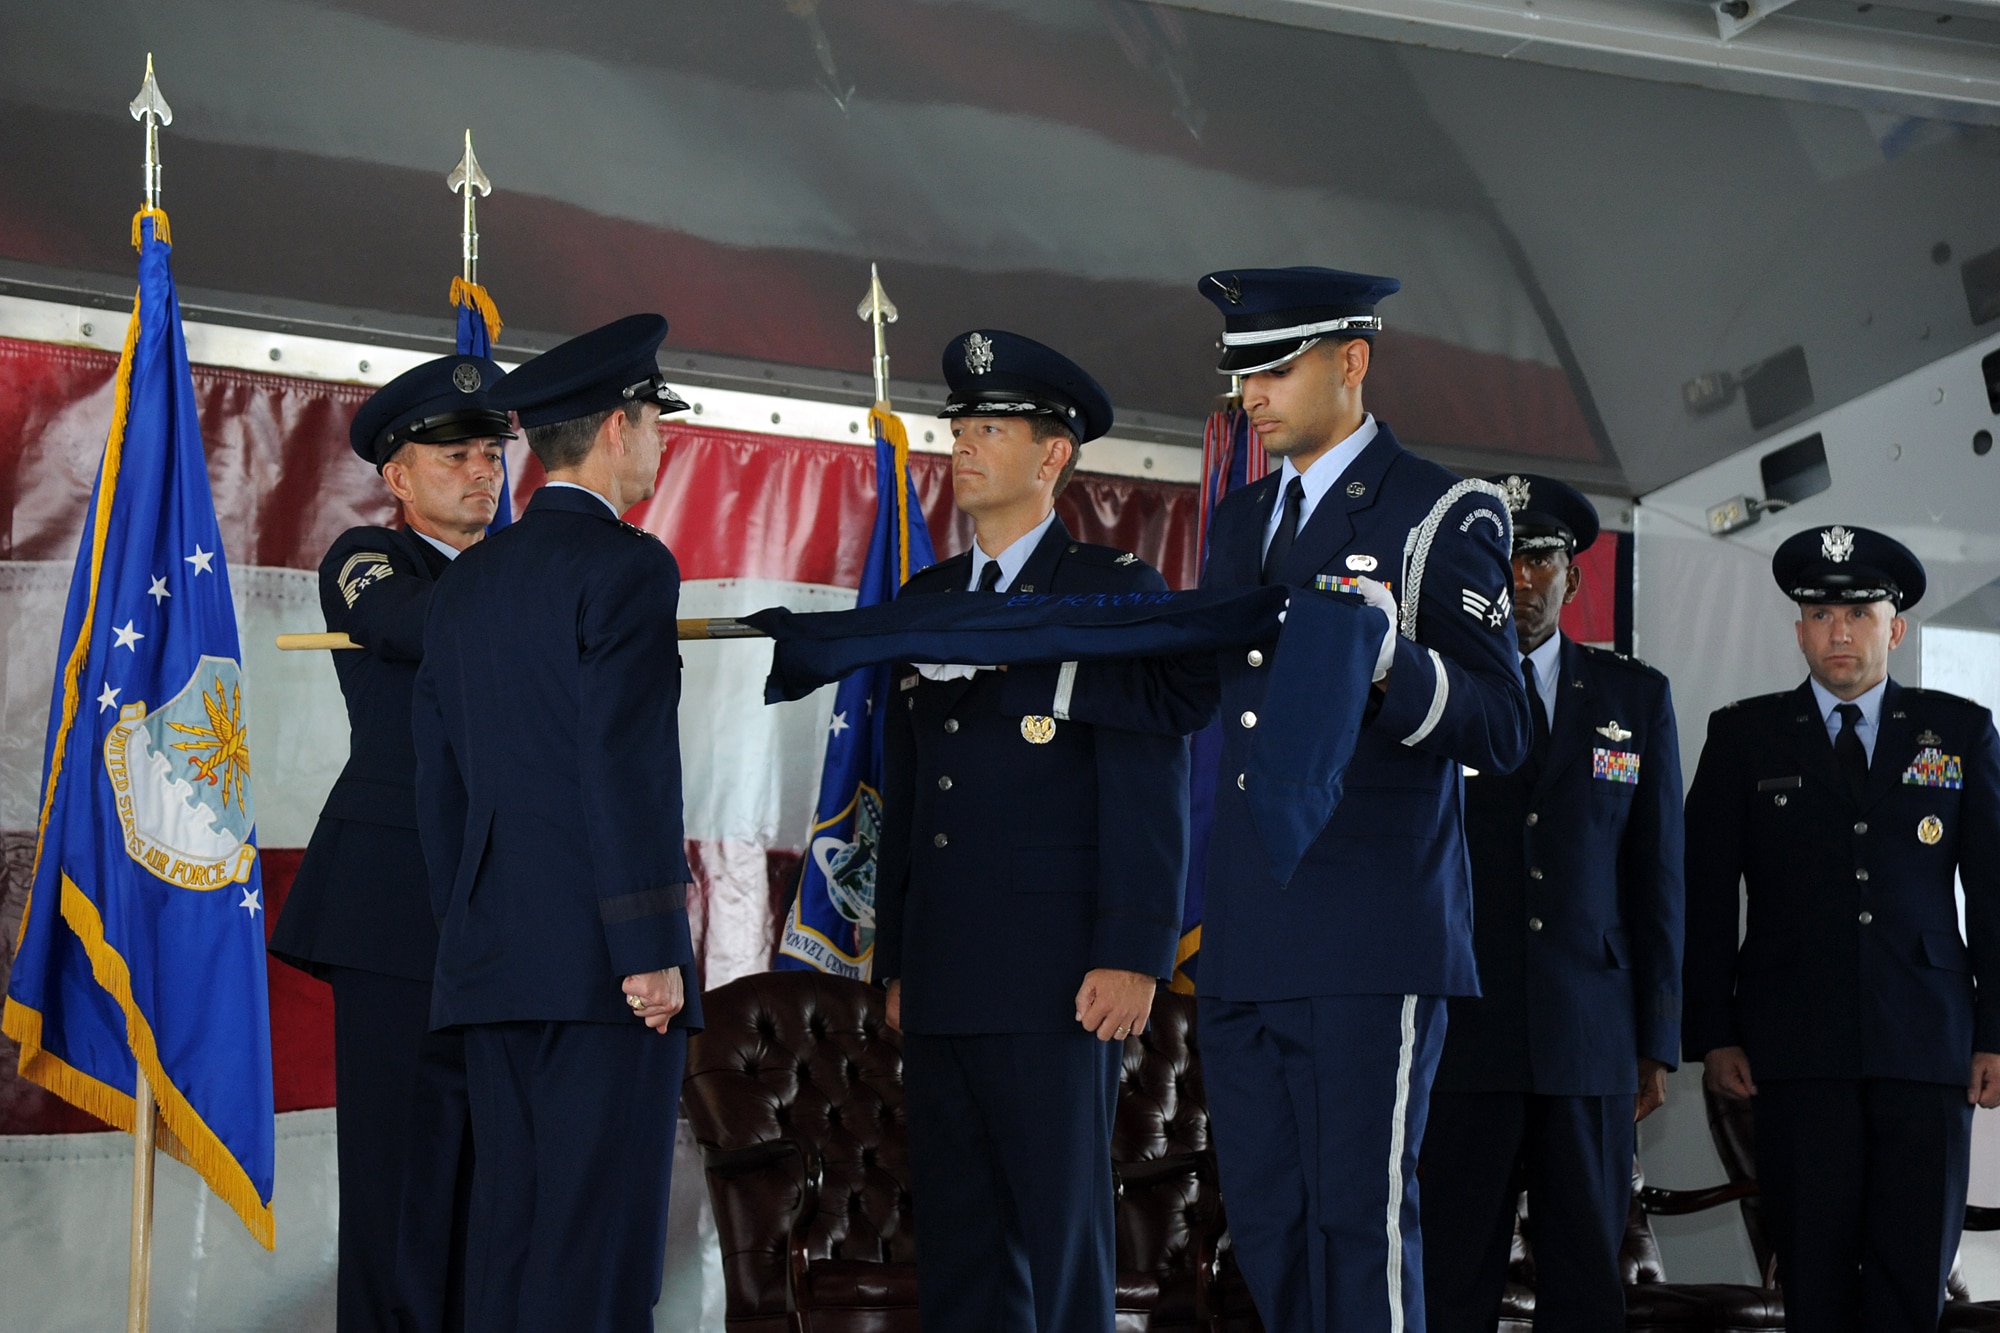 Air Force Deputy Chief of Staff for Manpower, Personnel and Services Lt. Gen. Darrell D. Jones and Air Force Personnel Center Services Directorate Director Col. Thomas Joyce inactivate and unfurl the flag of the Air Force Services Agency at the Air Force personnel, manpower and services inactivation and consolidation ceremony July 17 at Randolph Air Force Base. (U.S. Air Force photo/Richard F. McFadden)